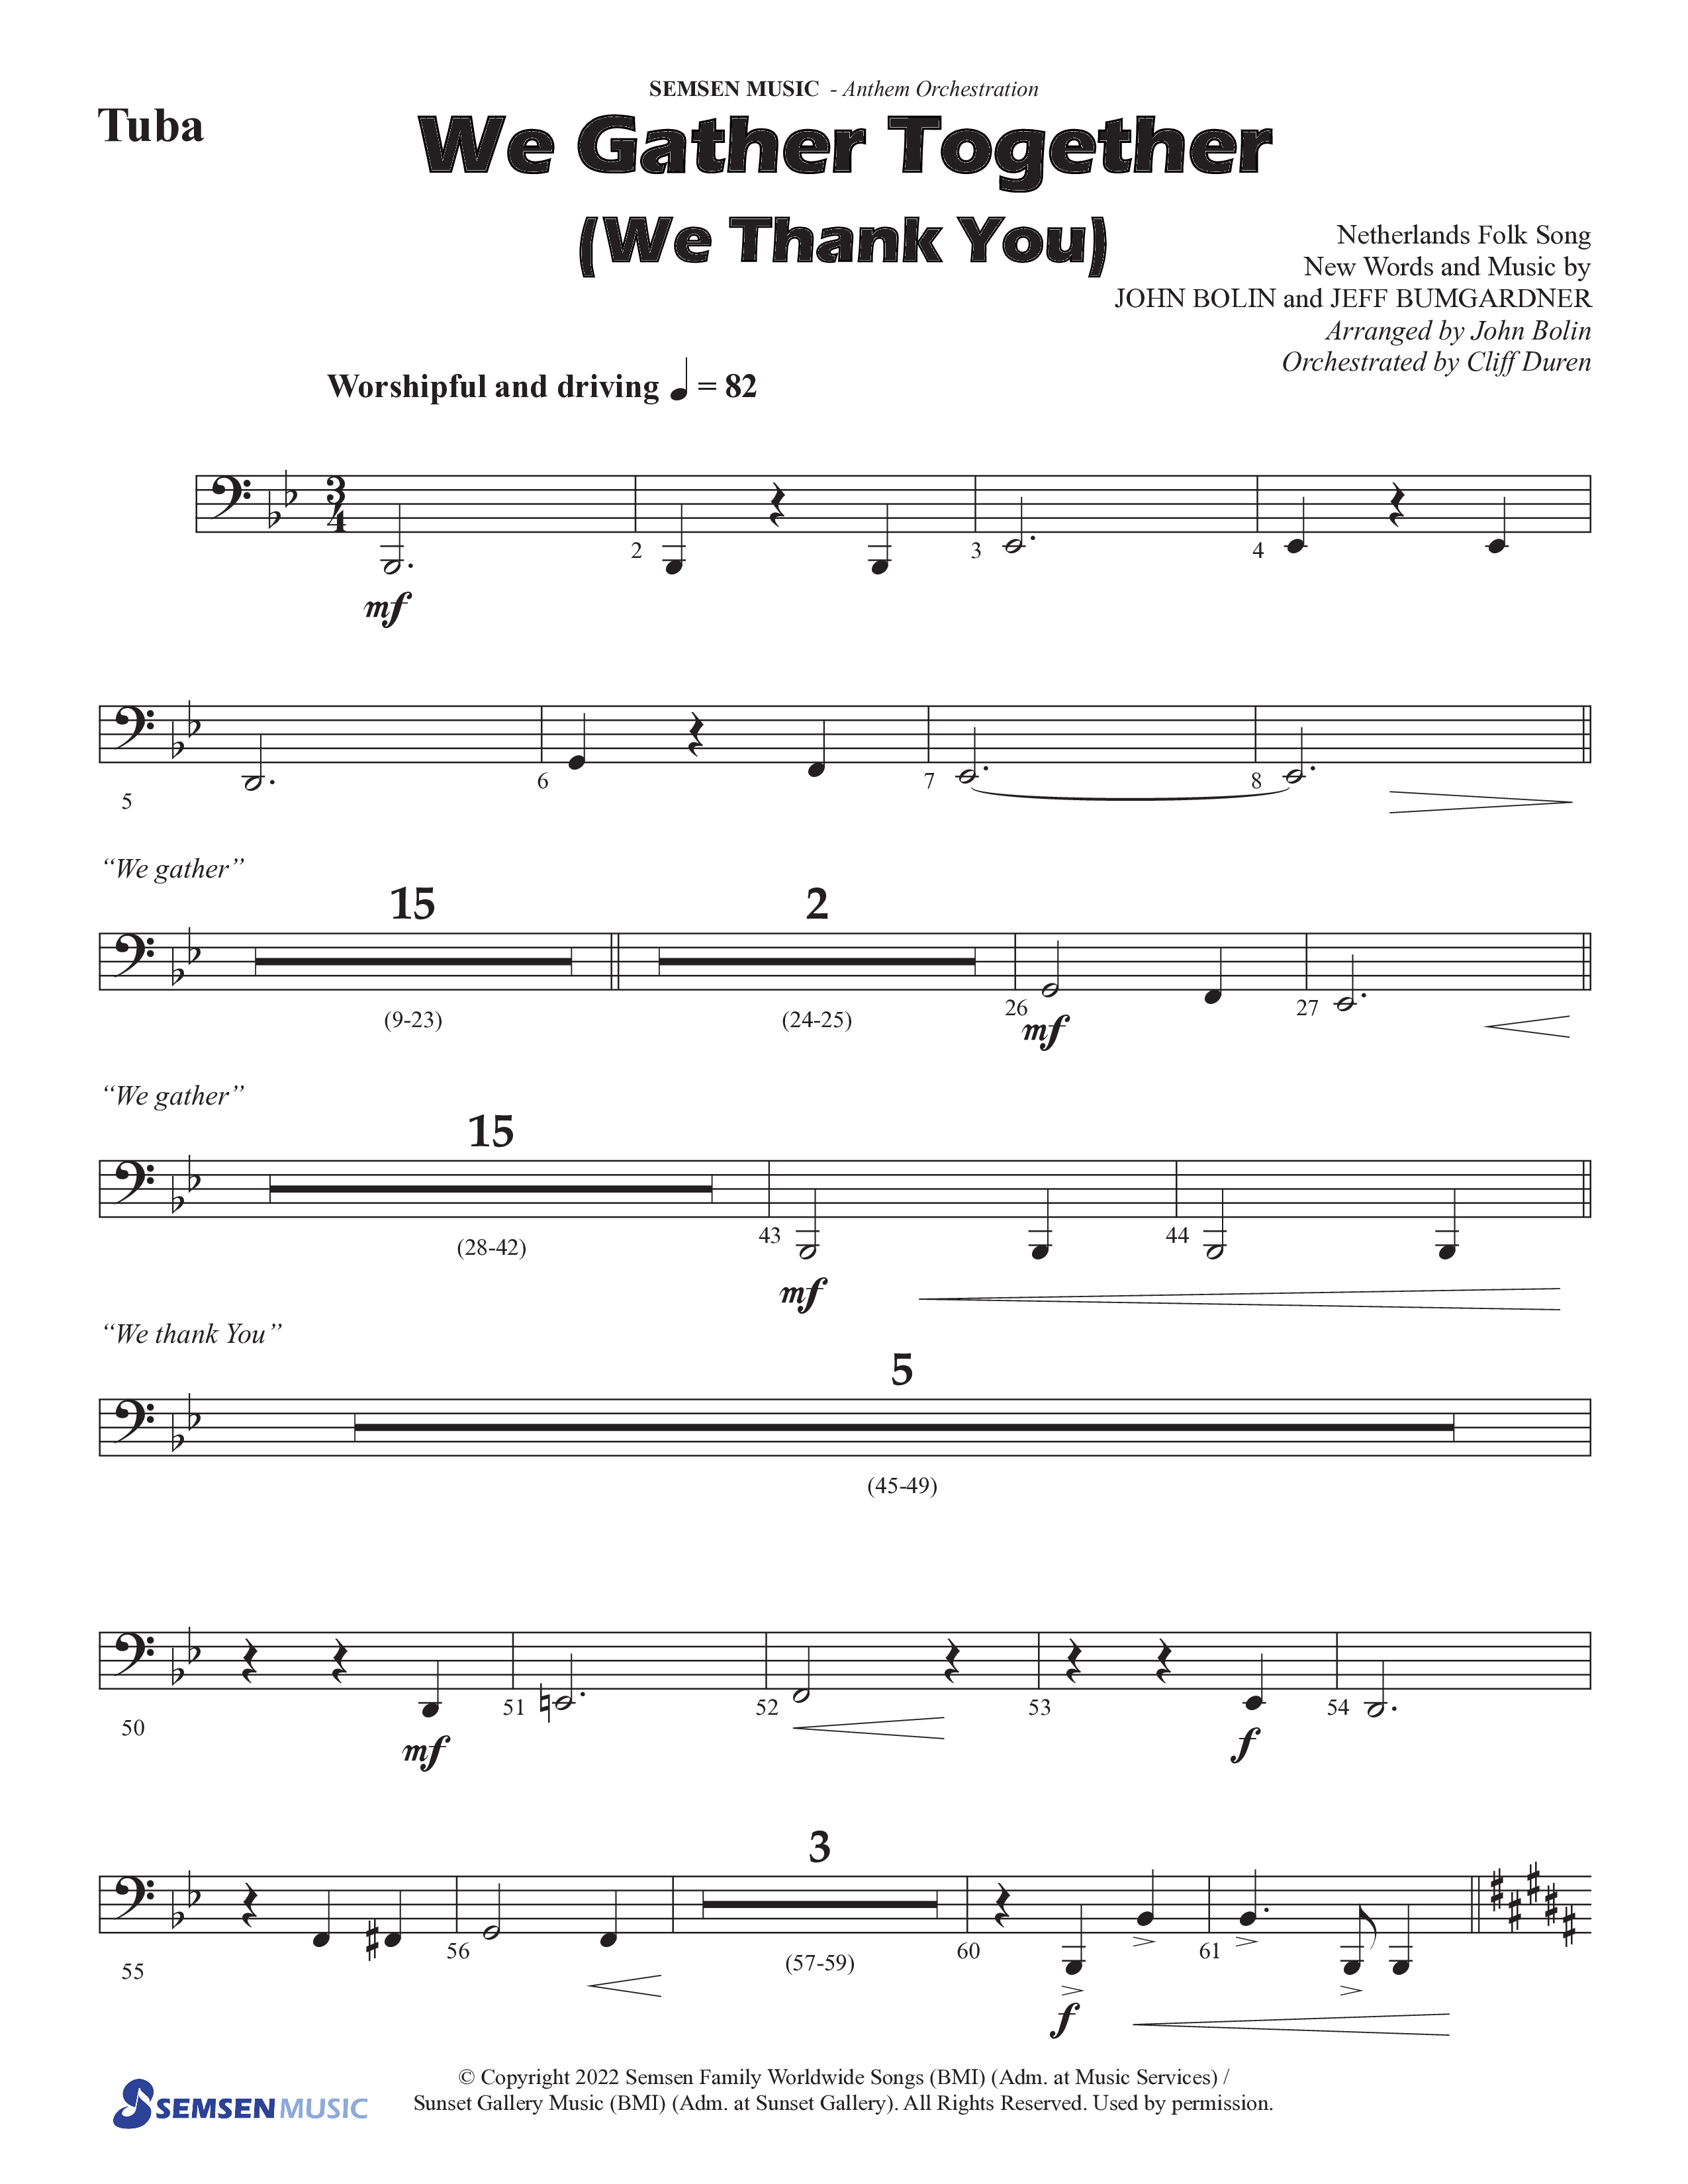 We Gather Together (We Thank You) (Choral Anthem SATB) Tuba (Semsen Music / Arr. John Bolin / Orch. Cliff Duren)